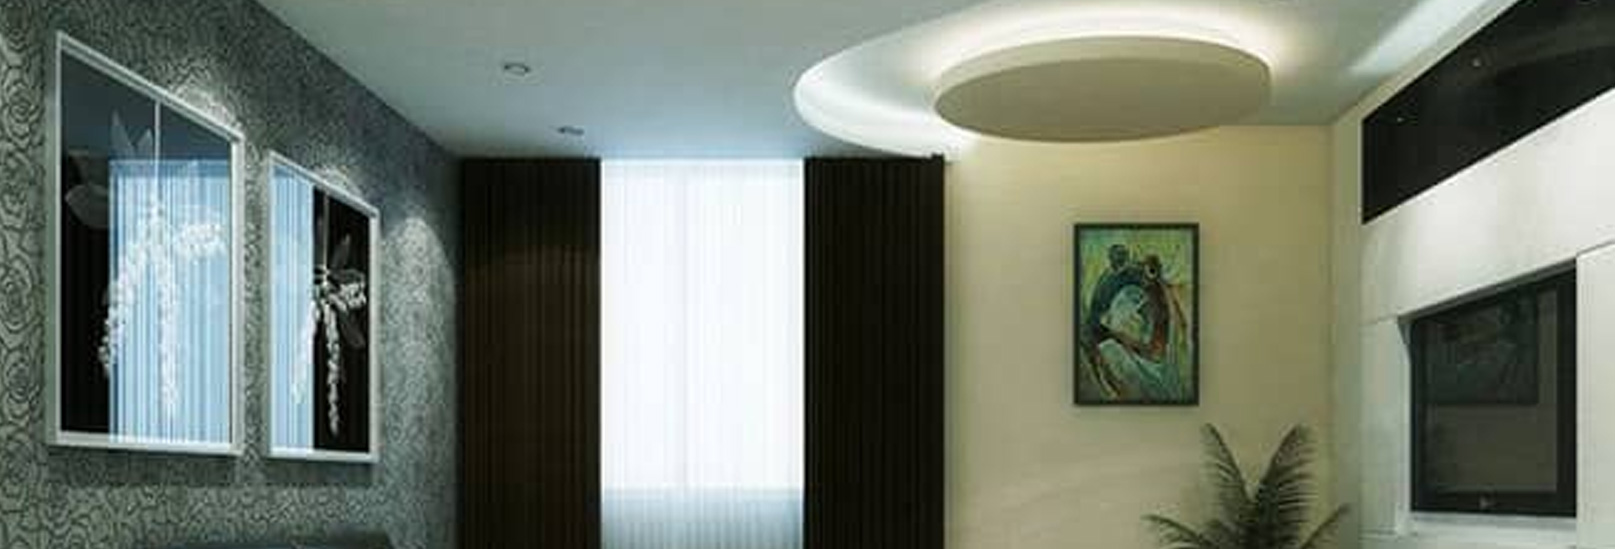 Ceiling Details - Creating an Elegant Ceiling Decor - Inviting Home